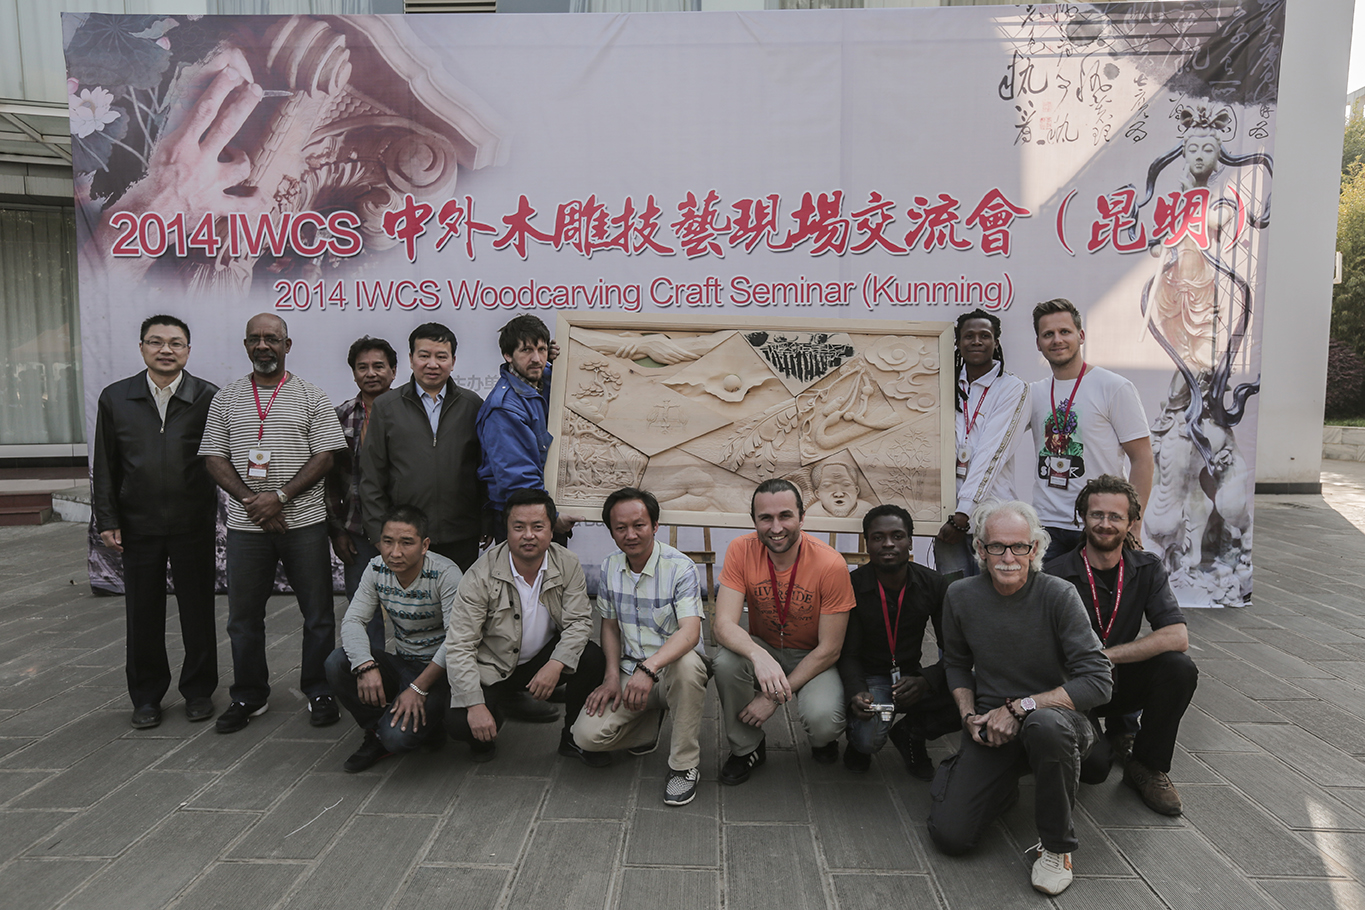 2014 World Wood Day - Woodcarving Collaboration in Kunming